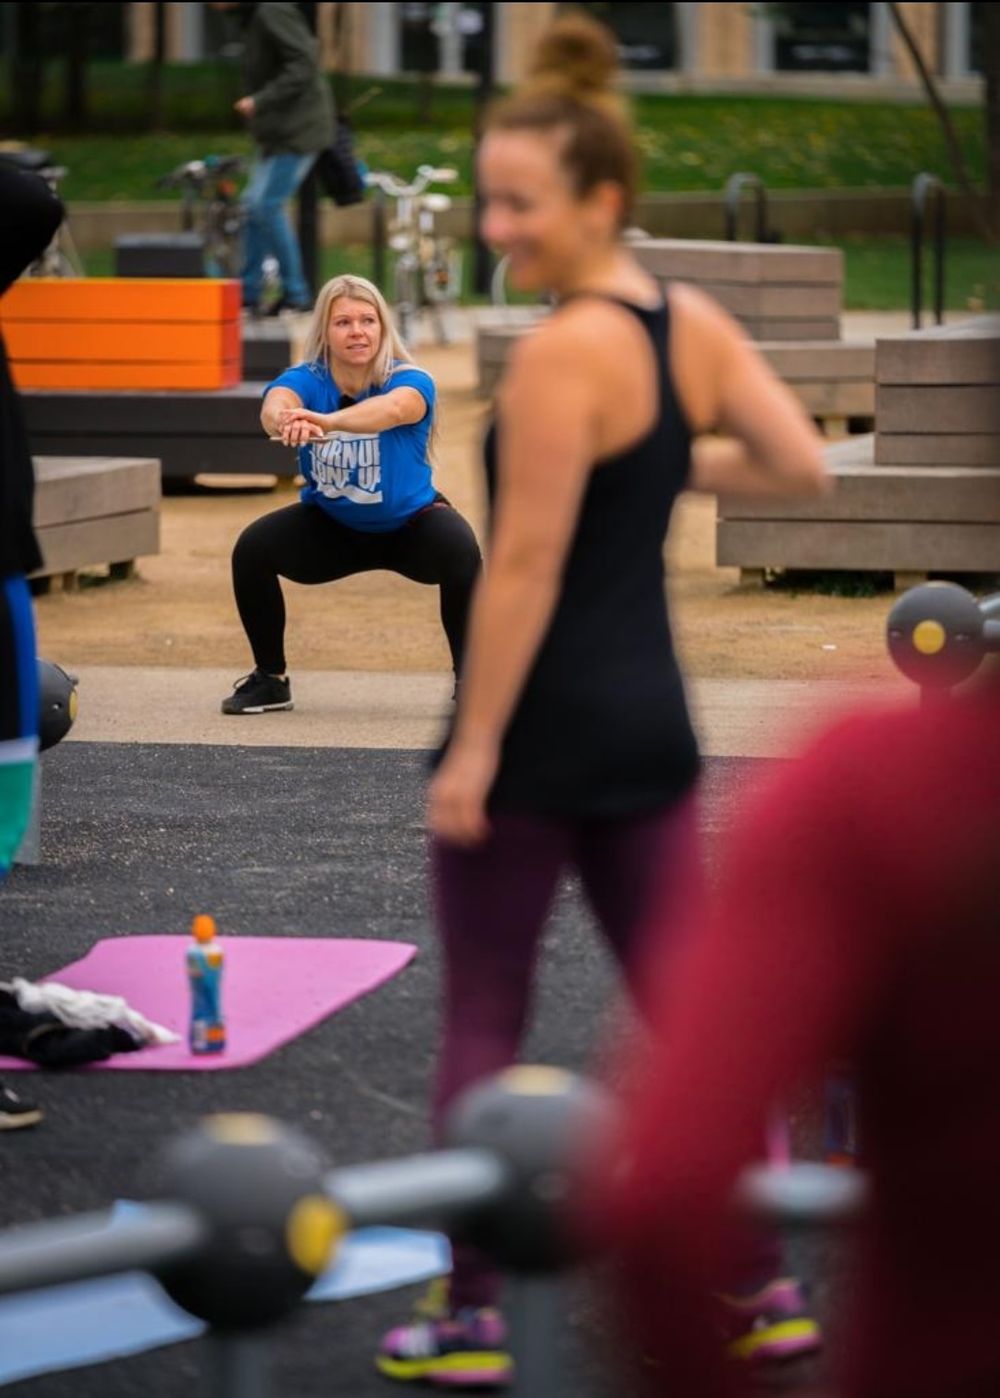 This is the RE-BOOT North London has been waiting for!

Starting Saturday 8th Jan at 10am in Finsbury Park Outdoor Gym Area!

This session is a mix between functional training and metabolic conditioning. It's suitable for all fitness levels, so whether you are just waking up from your winter hibernation or are desperate for that burn I will make sure you will get what you came for!